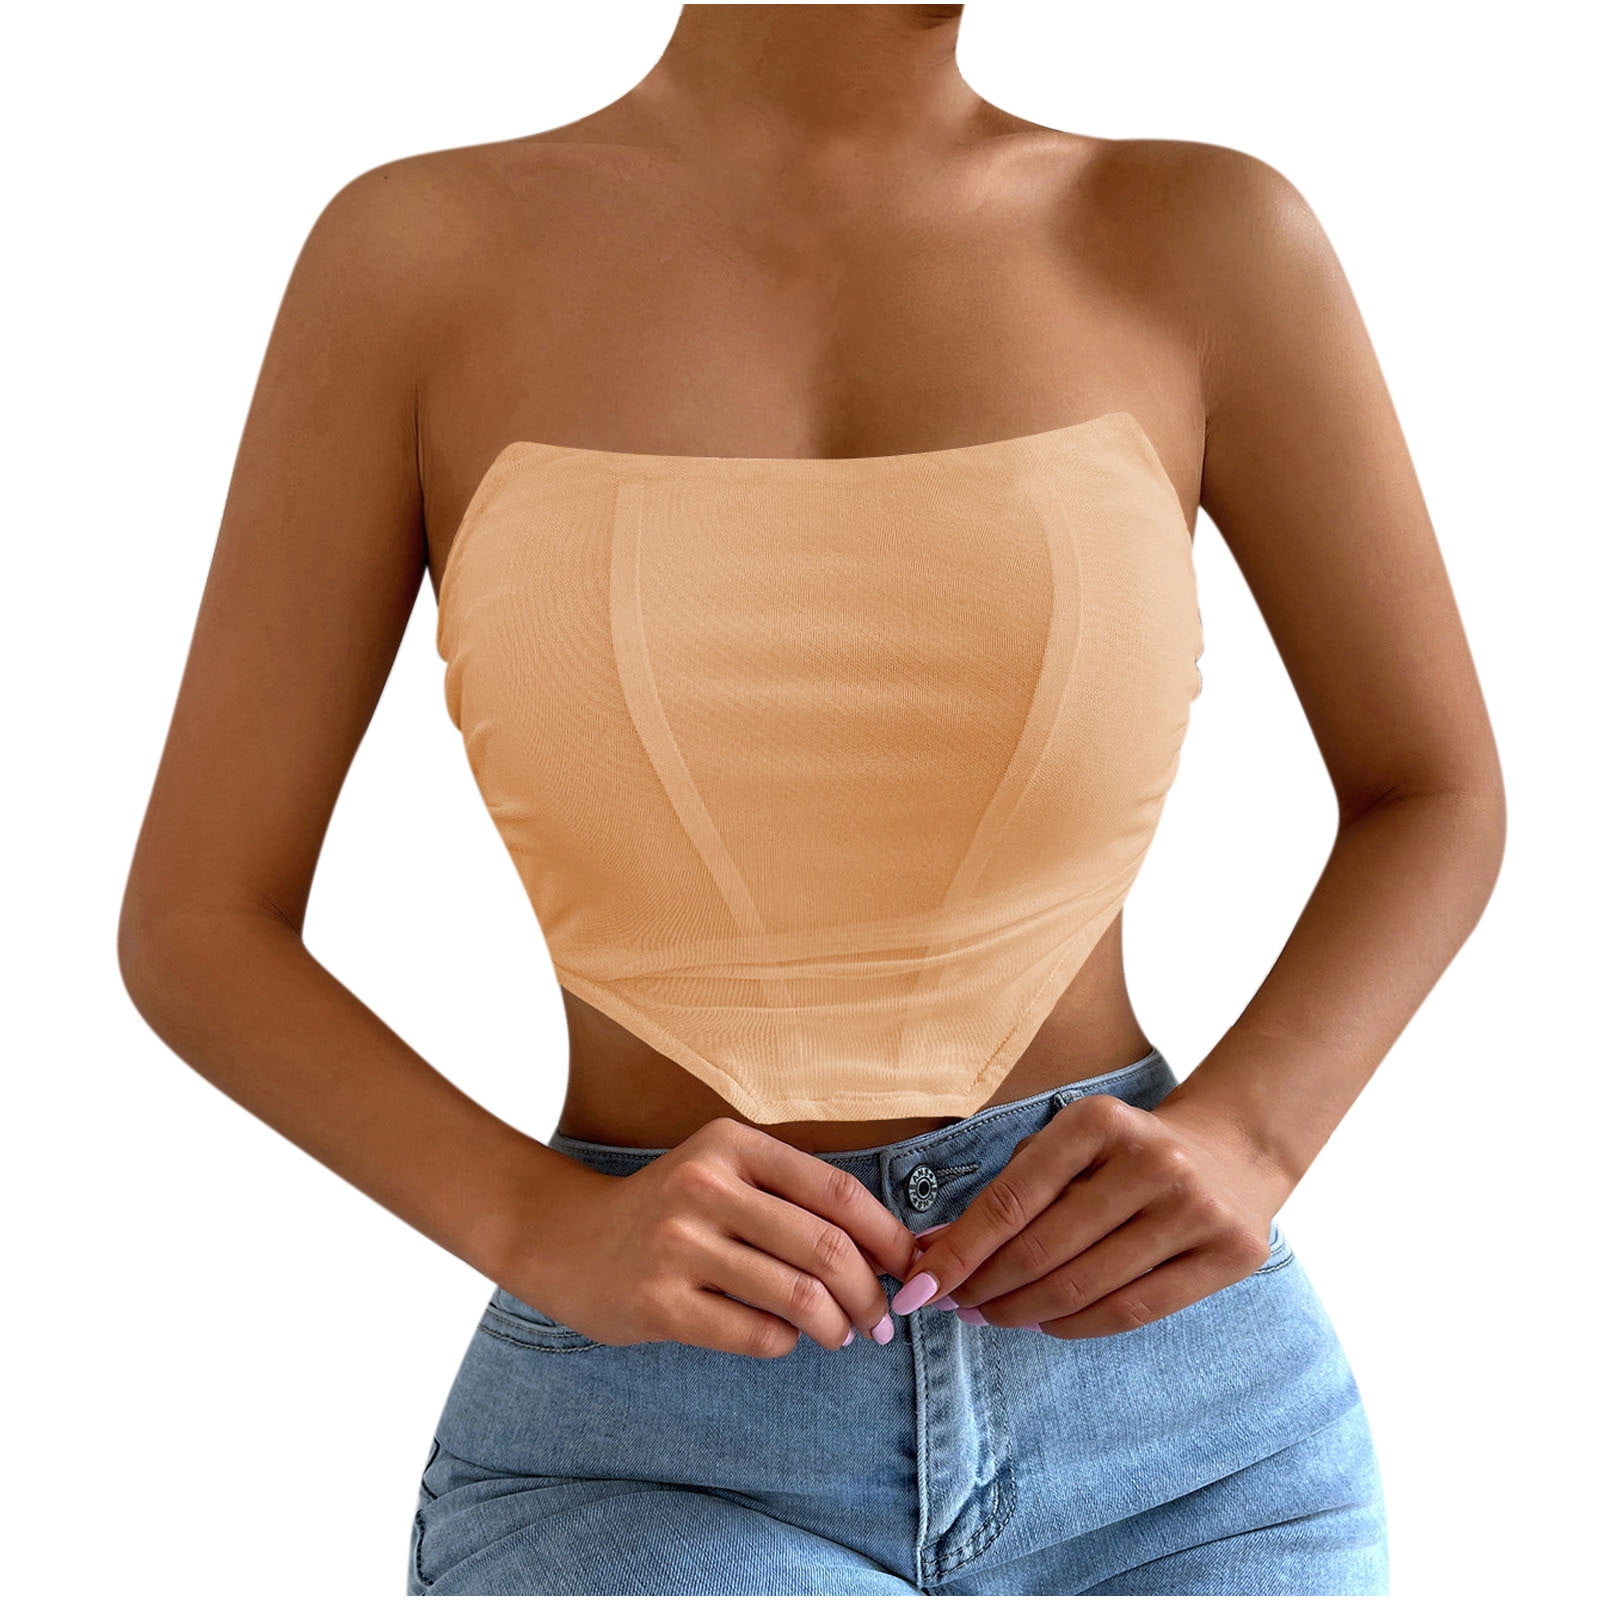  Women's Sexy Mesh Bustier Crop Top Backless Chain